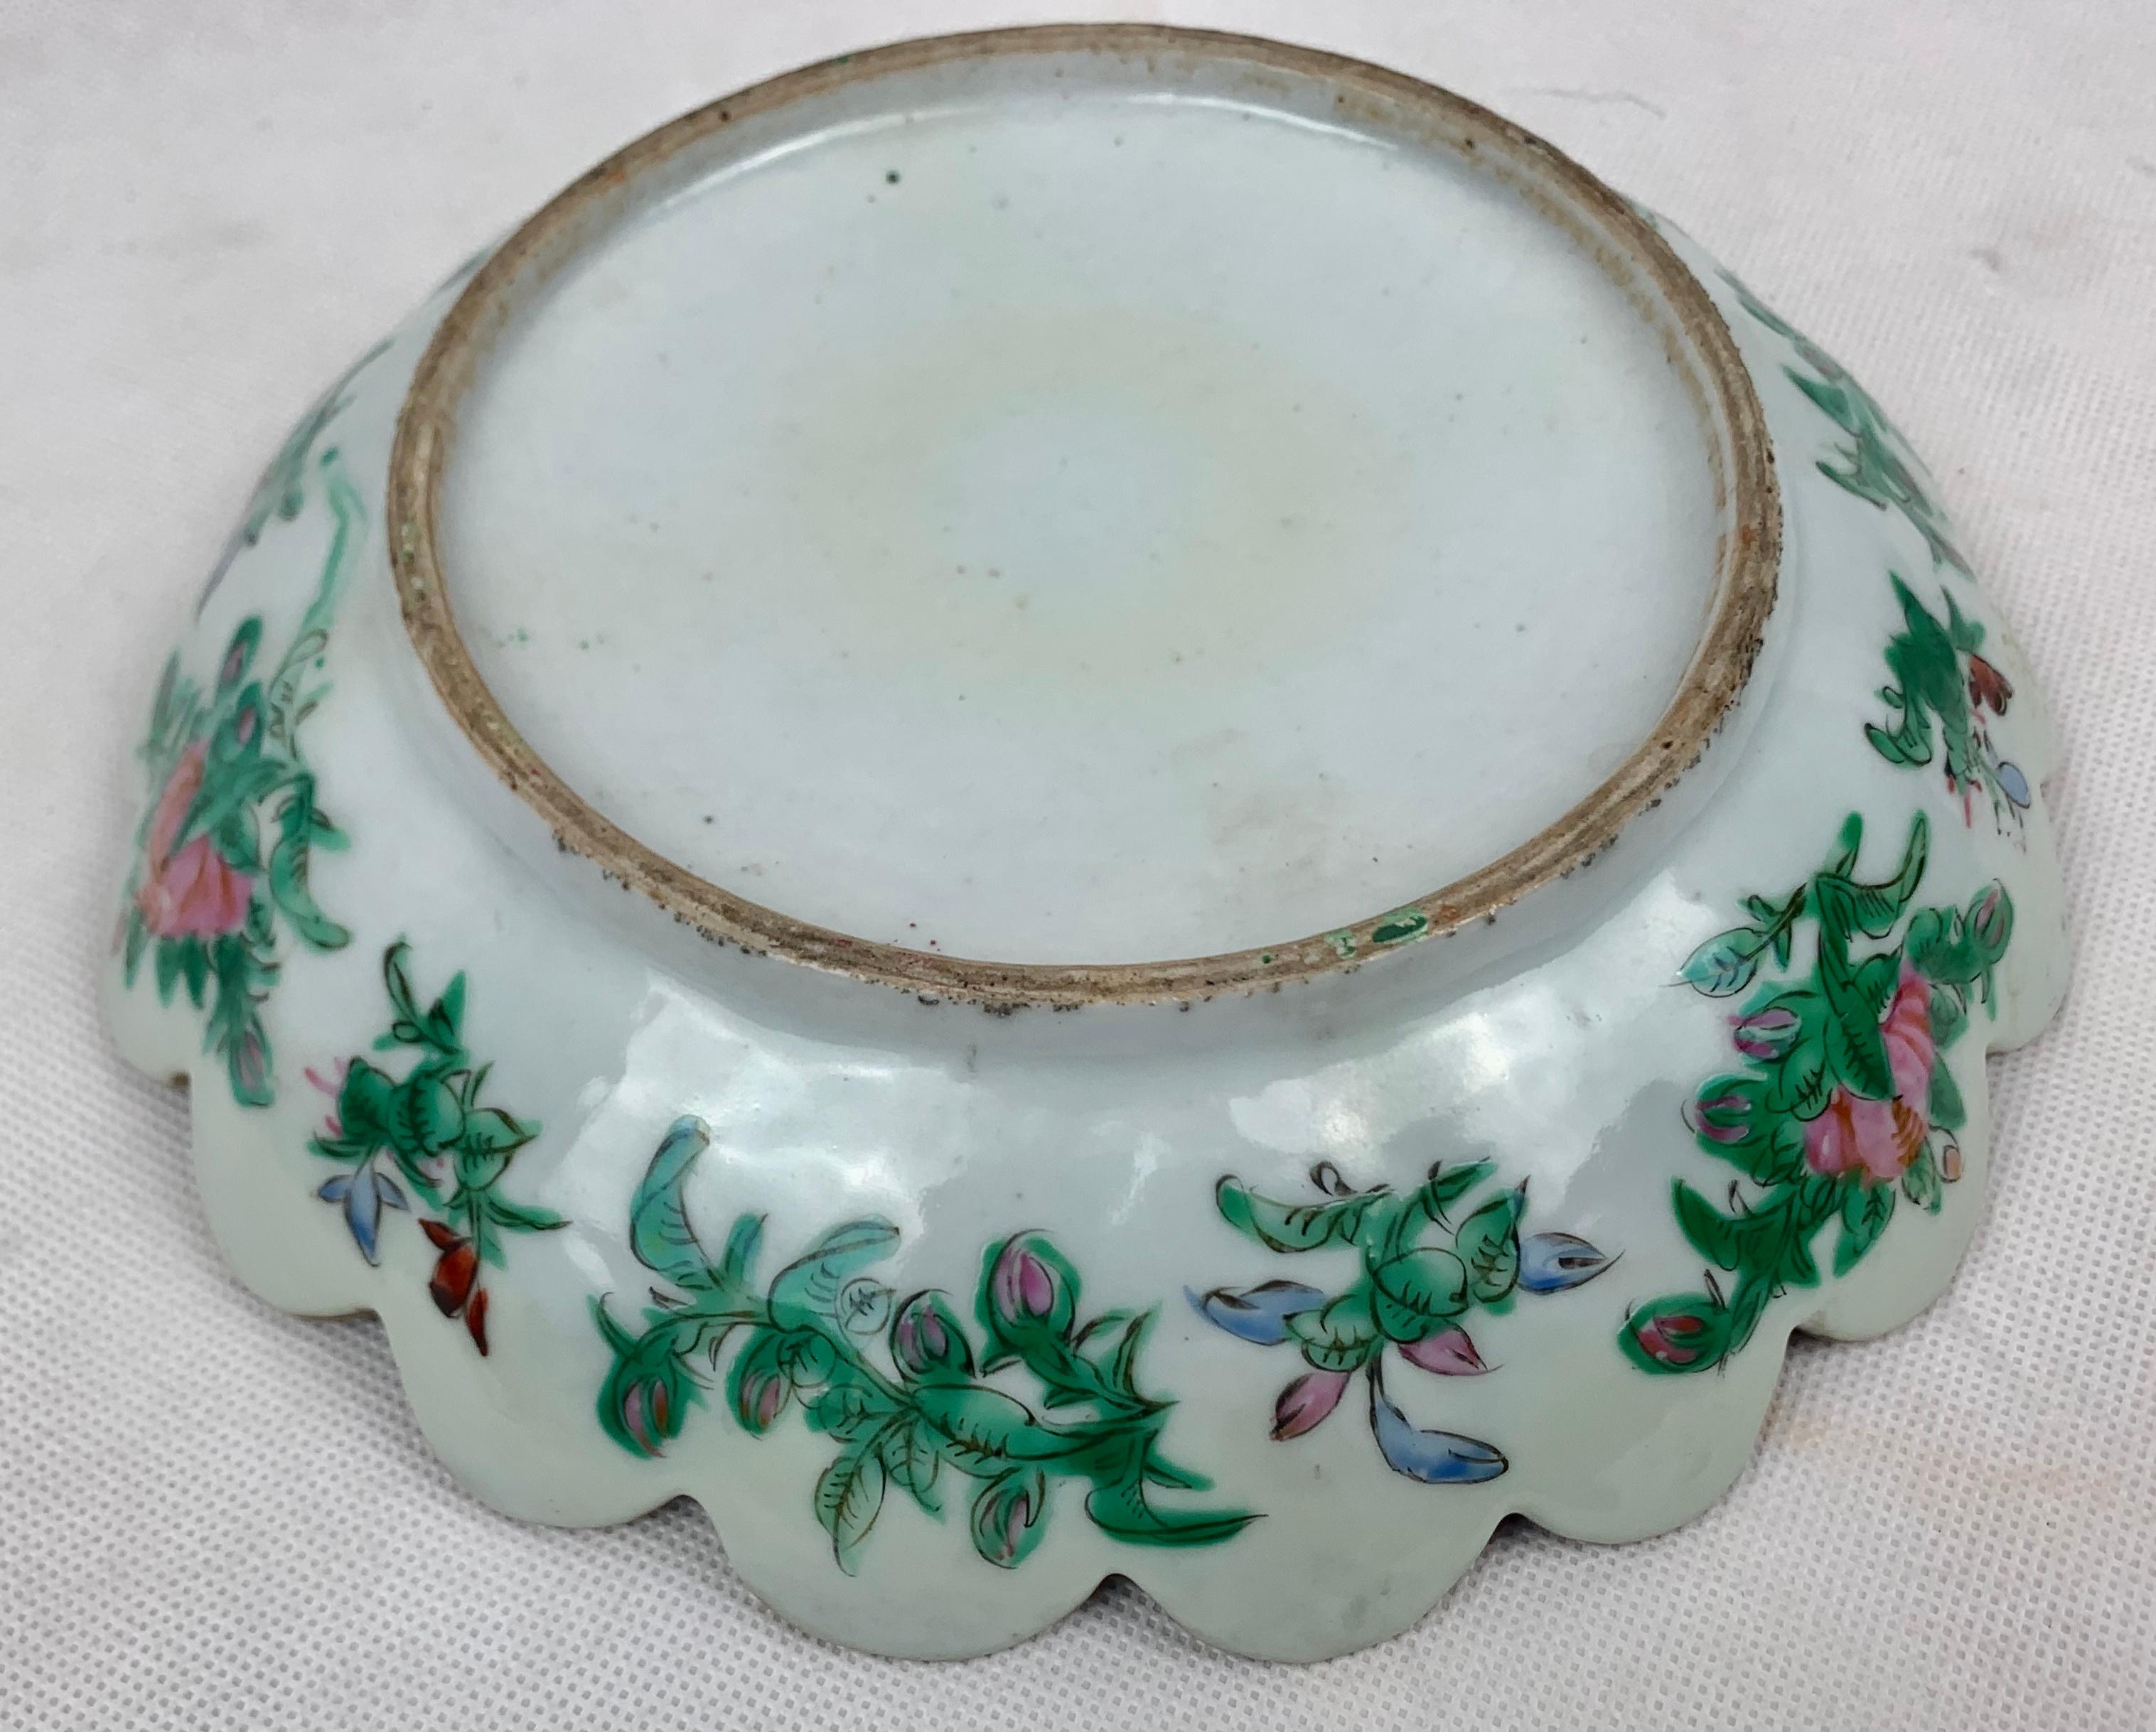 Scalloped Edge Rose Medallion Hand Decorated Porcelain Bowl-Chinese Export 2